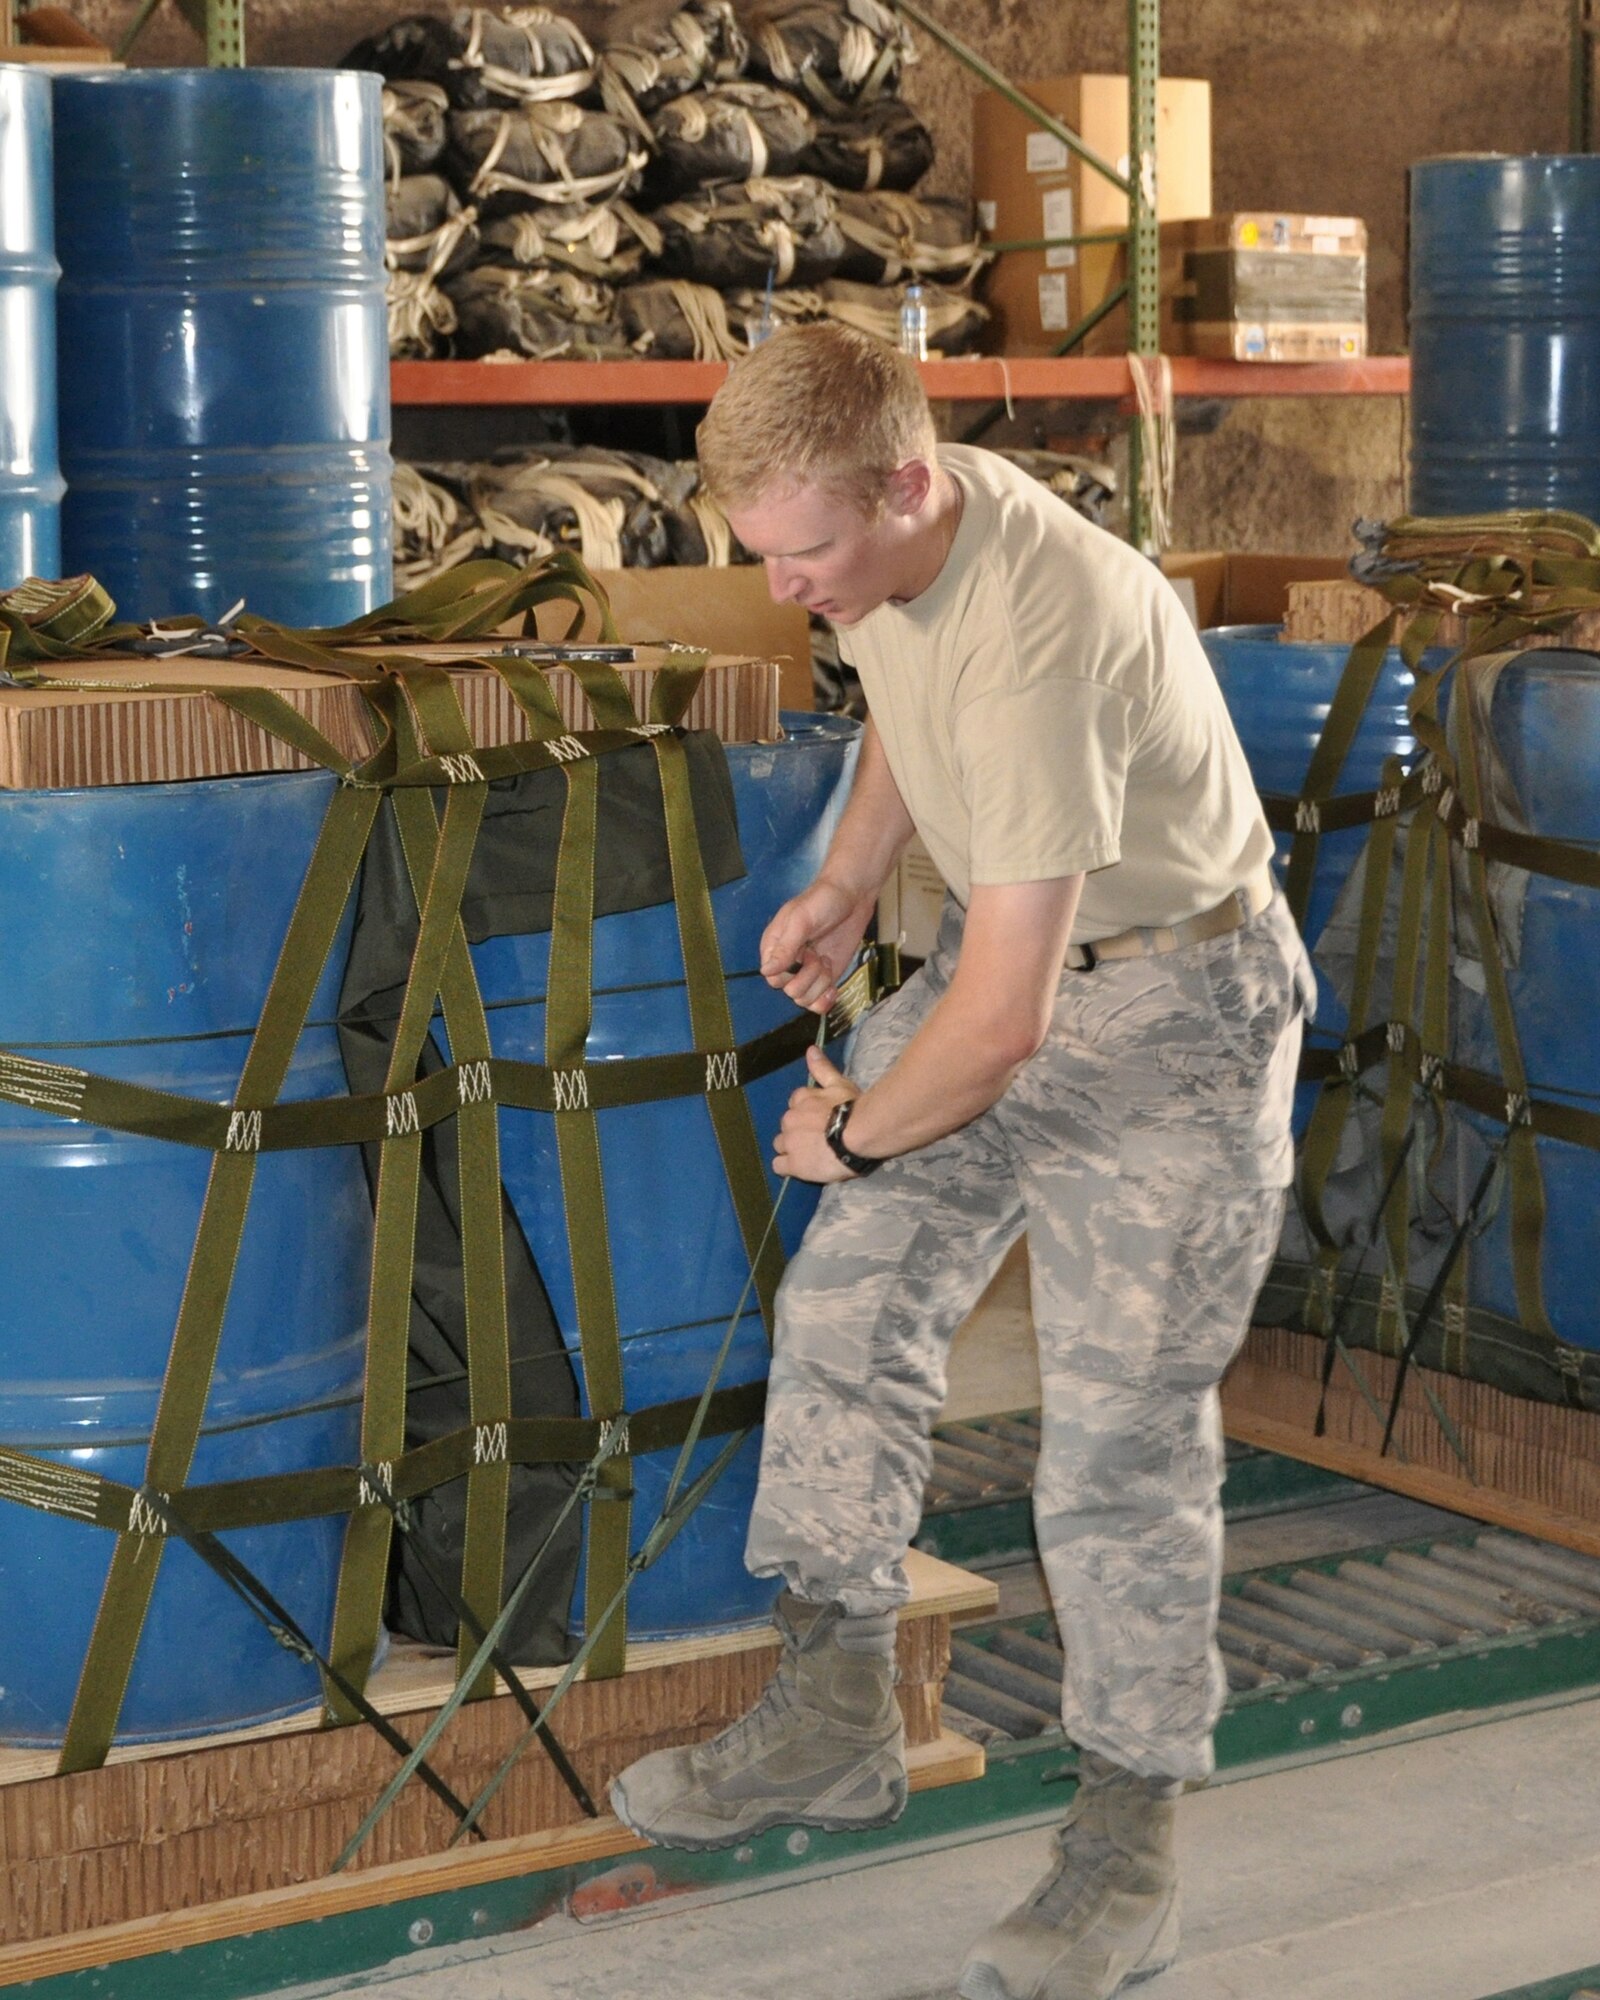 U.S. Air Force Academy Cadet 1st Class Jordan Wittman pulls on straps to ensure the cargo bundle is securely fastened to the pallet while working with U.S. Army Riggers June 18, 2011, in Southwest Asia. Cadet Wittman is taking part in "Deployed Ops", a summer program that sends Academy cadets to deployed locations to follow officers in different career fields and to gain an understanding of career responsibilities. (U.S. Air Force photo/Cadet 1st Class Shaina Thompson)
